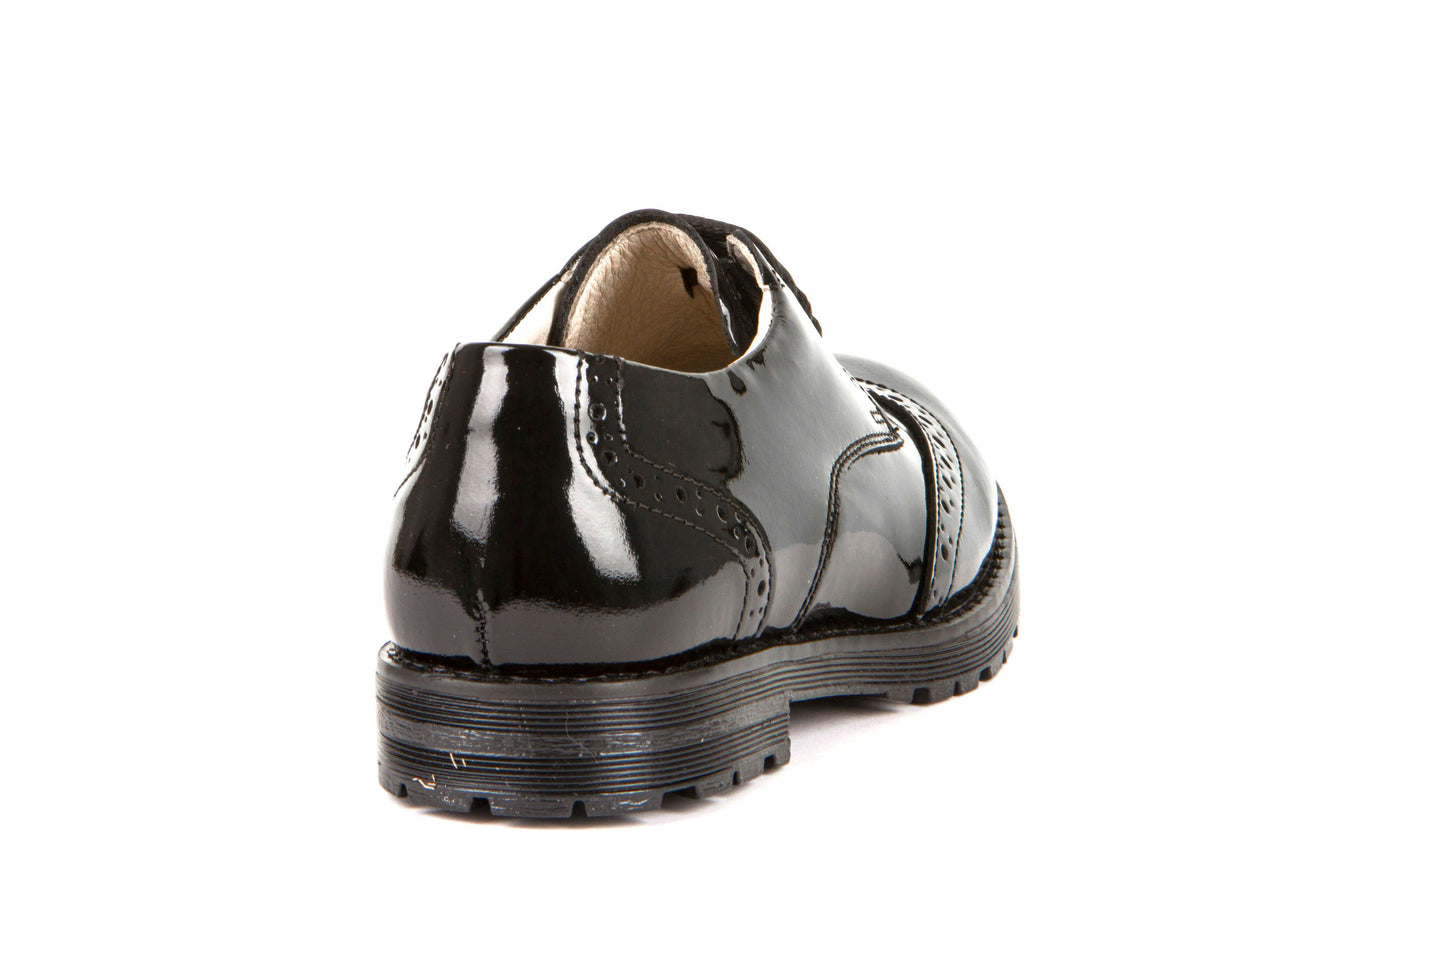 A girls school shoe by Froddo, style Charlie, in black patent with lace up fastening. Back view.